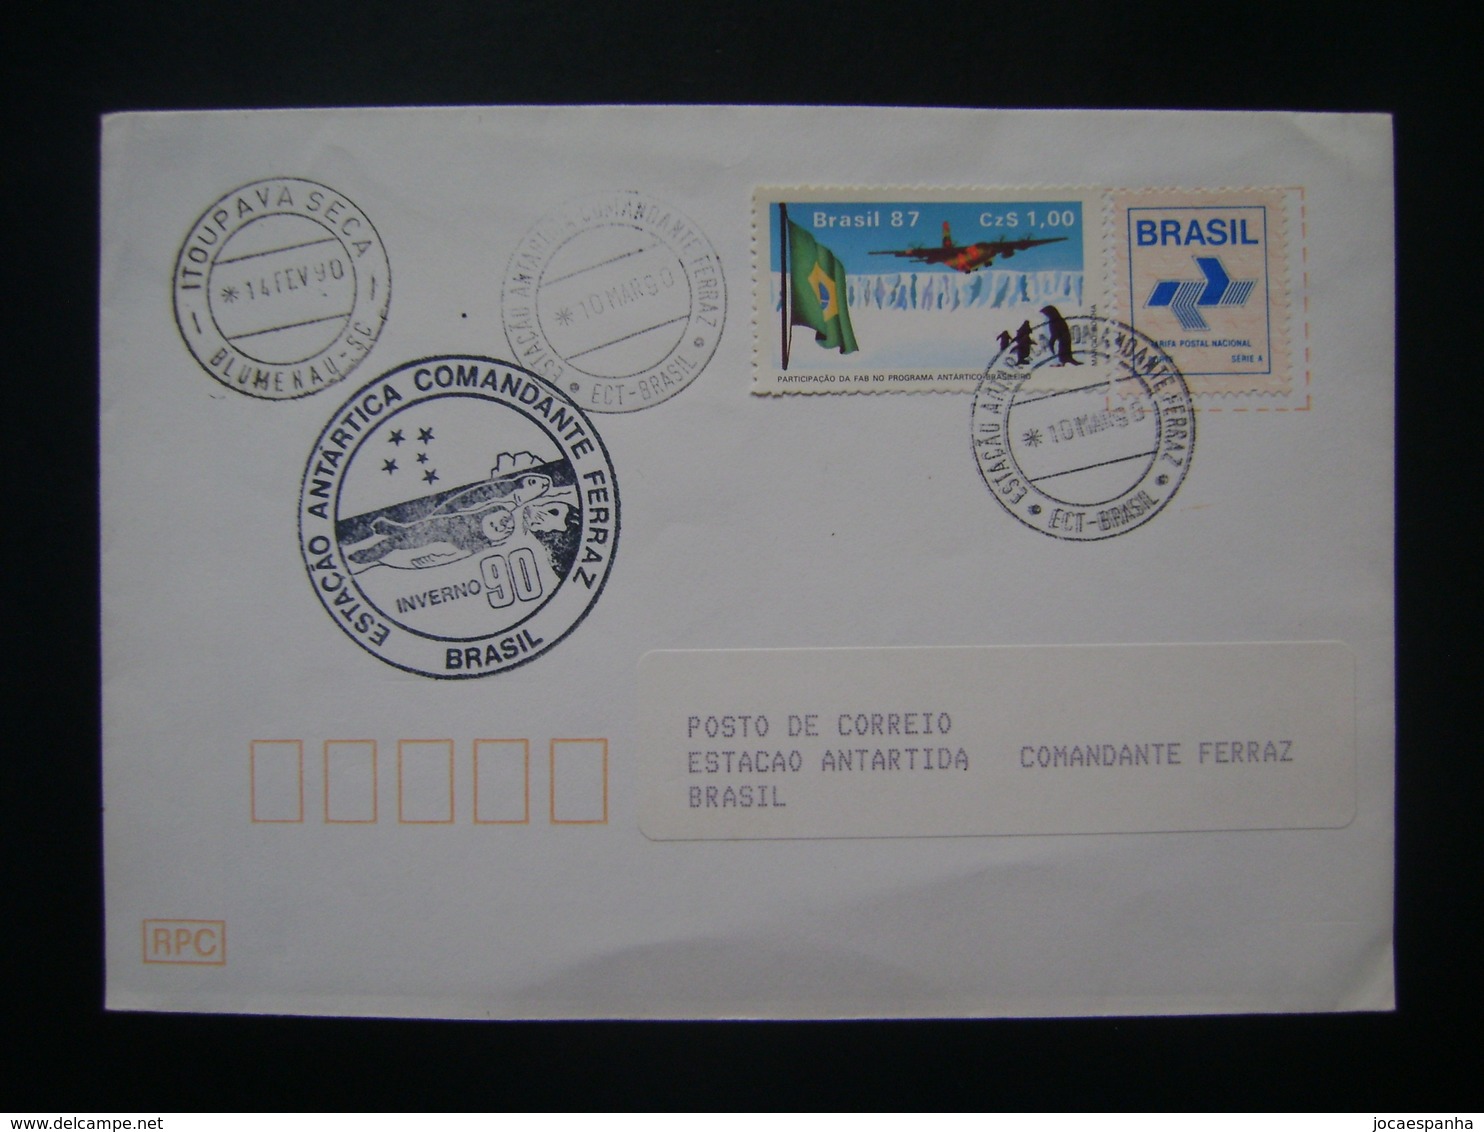 BRAZIL - ENVELOPE SUBMITTED BASED ON ANTARTIDA AND RELEASED ON 10/03/90 - Preserve The Polar Regions And Glaciers